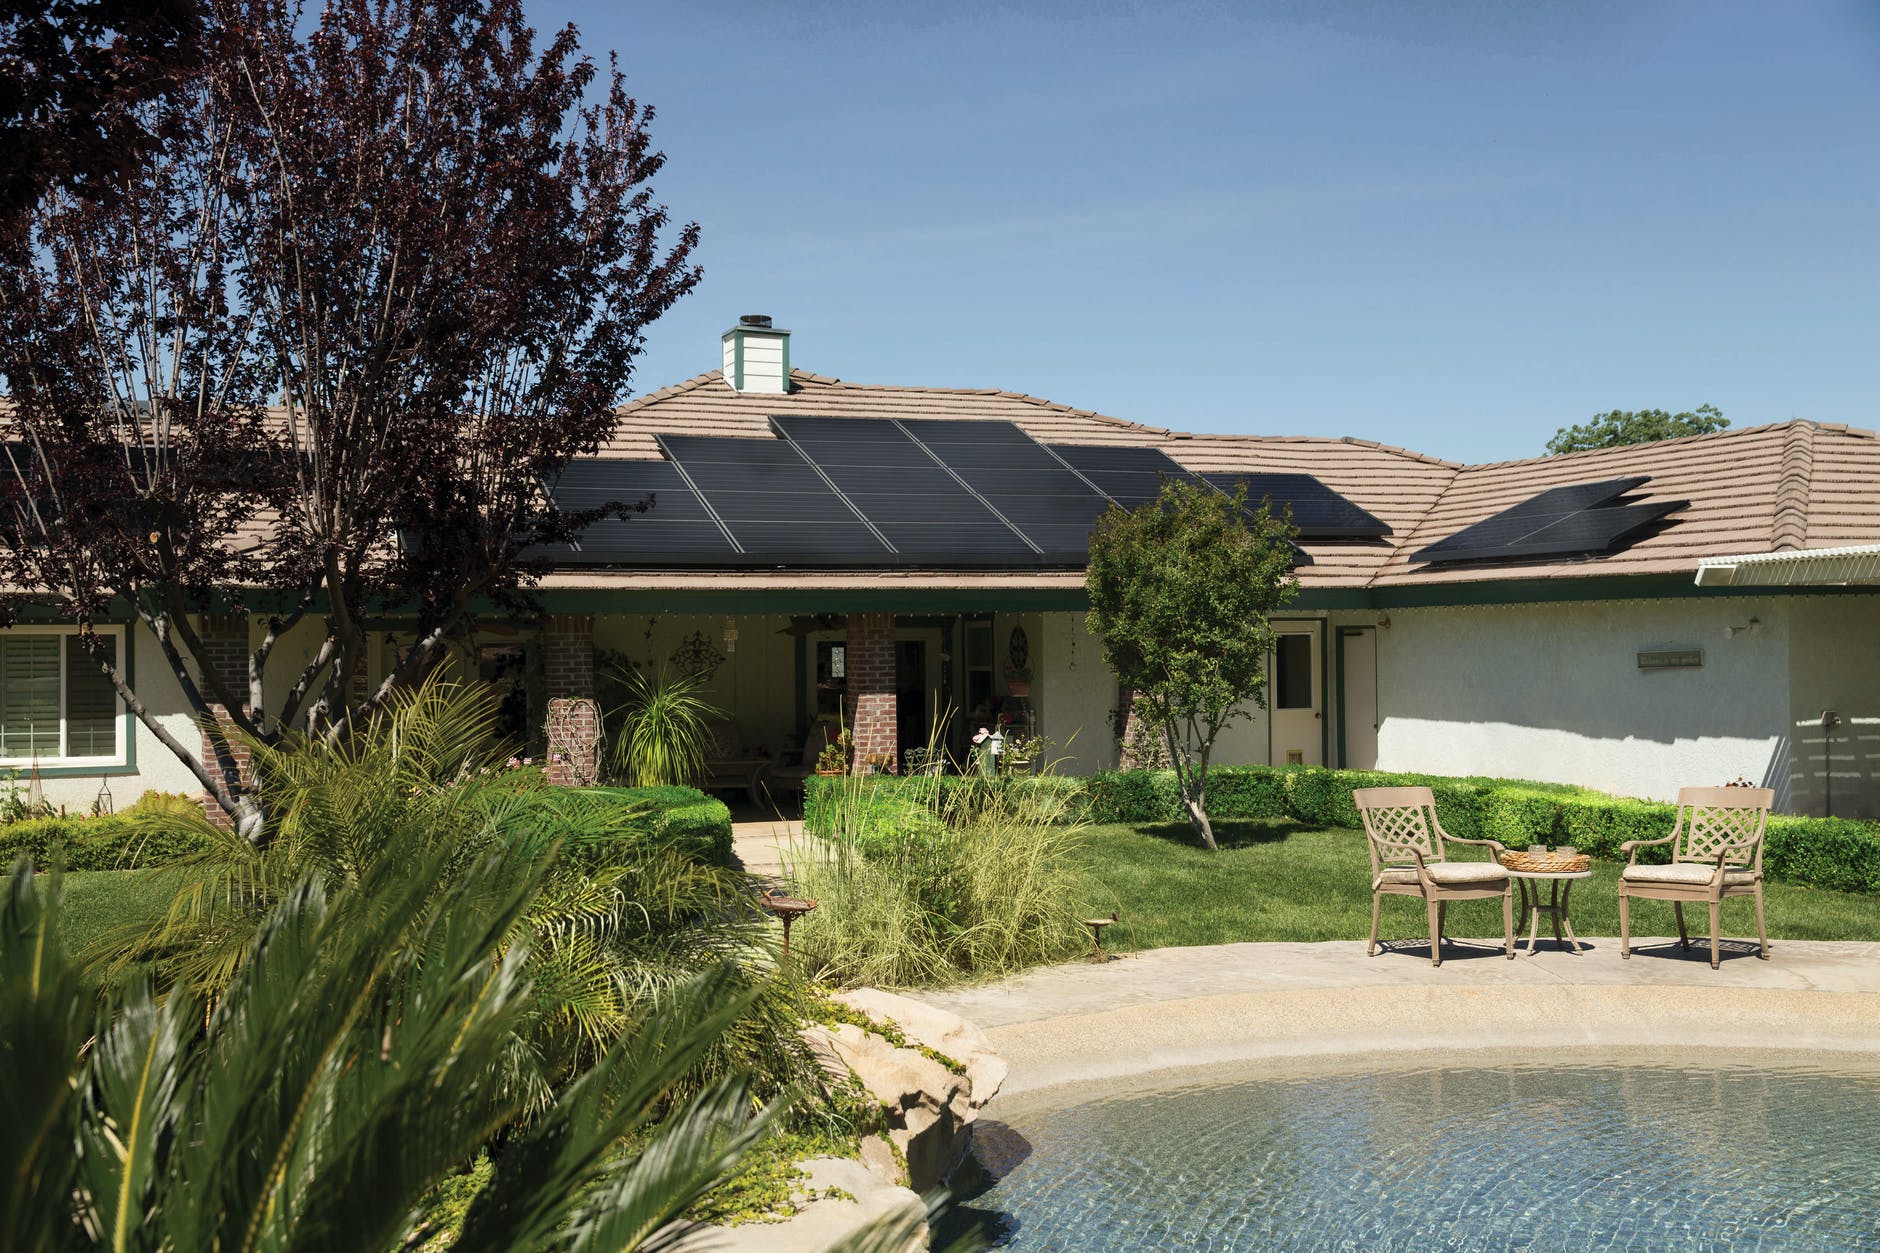 Leasing a solar panel is just like renting any other kind of property.